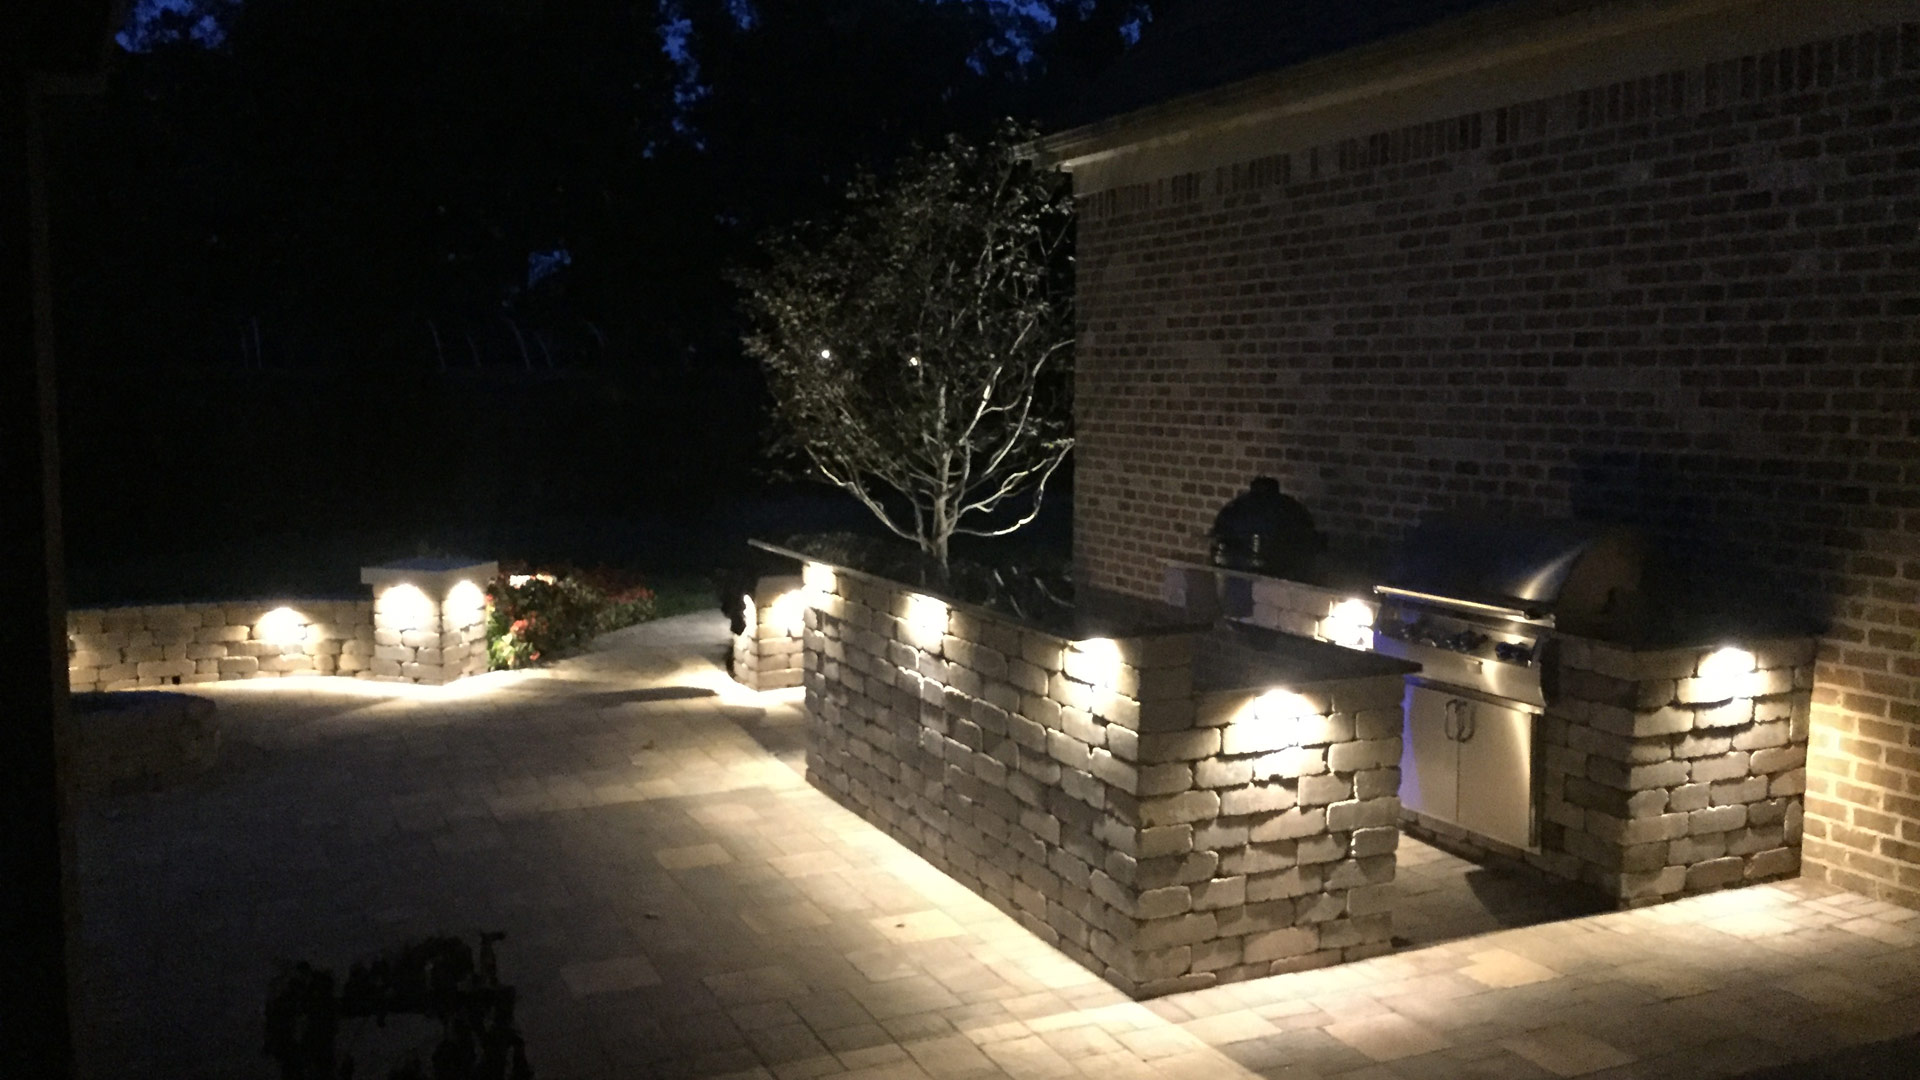 Landscape Lighting Can Enhance the Beauty & Safety of Your Outdoor Areas